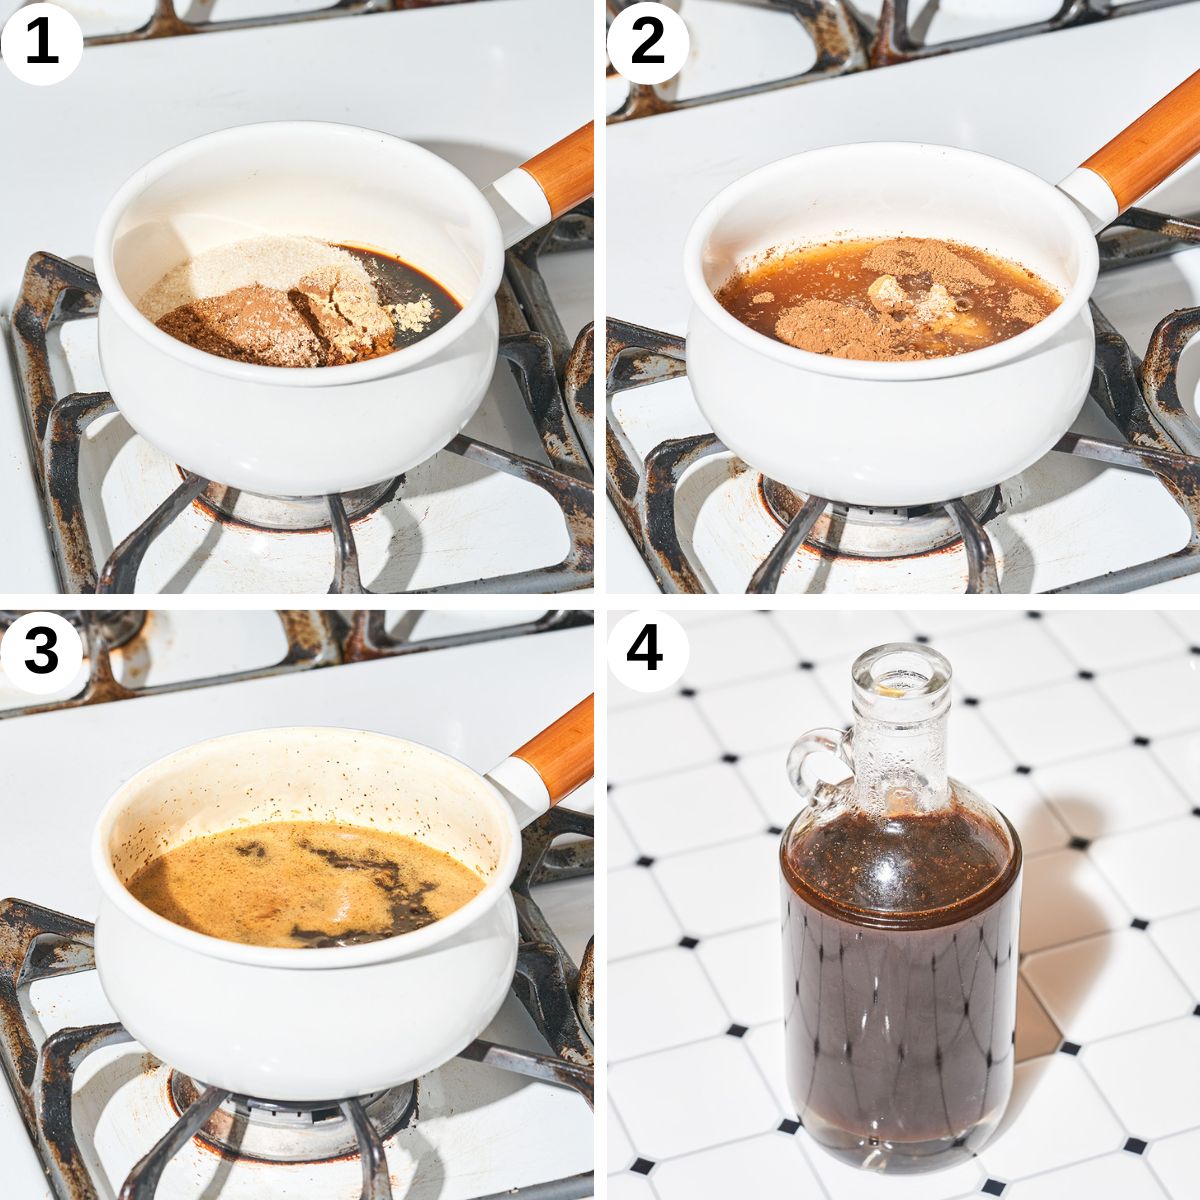 Spiced syrup steps 1 to 4, adding ingredients, before and after cooking, and in a bottle.